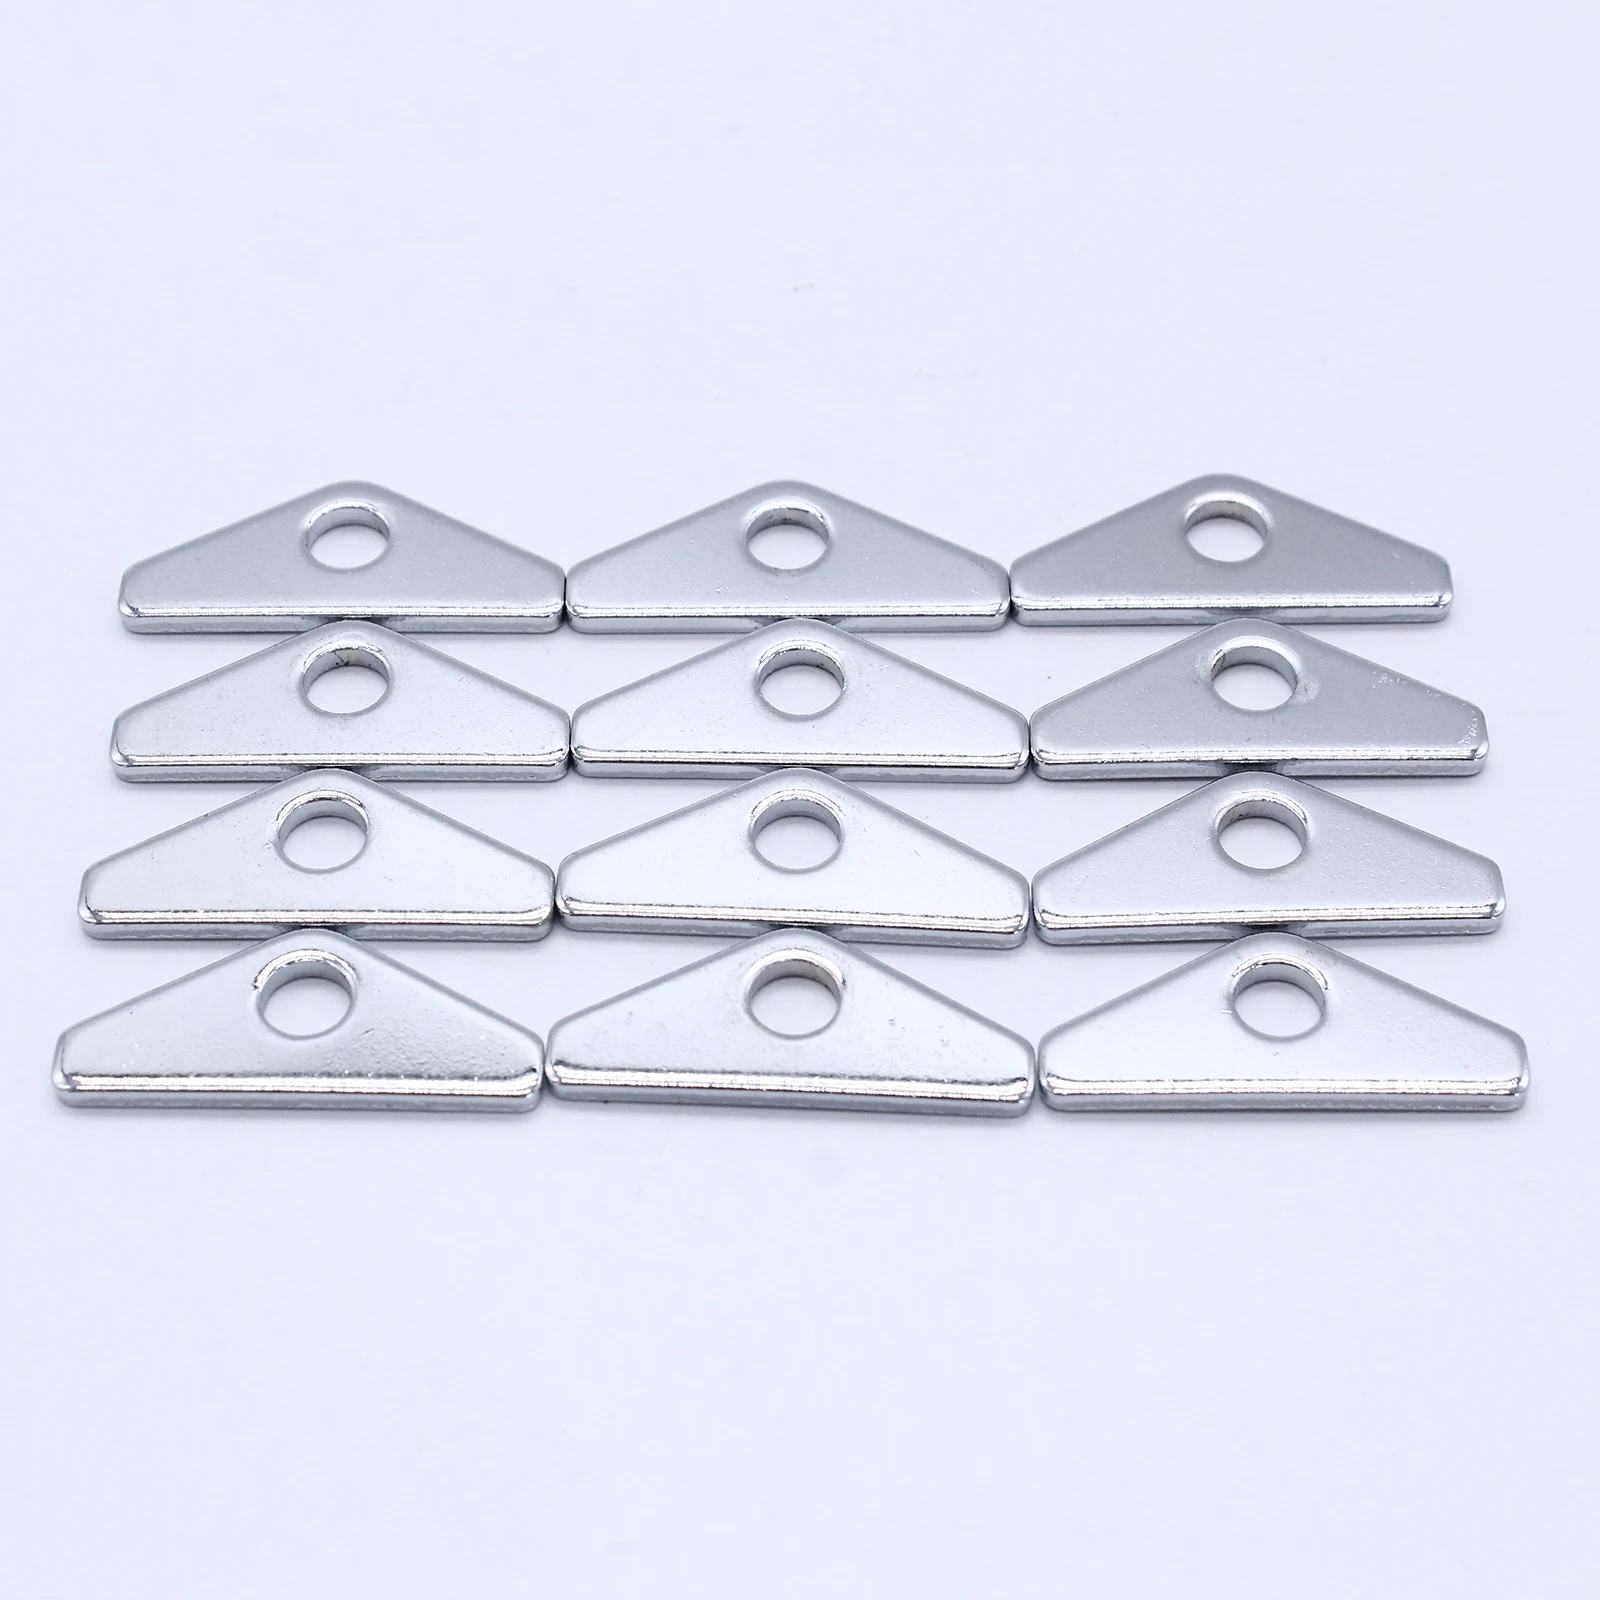 Valve Cover Mini Spreader Tab Mini Valve Cover Hold Down Tabs Small Block For Ford 260 302 351W